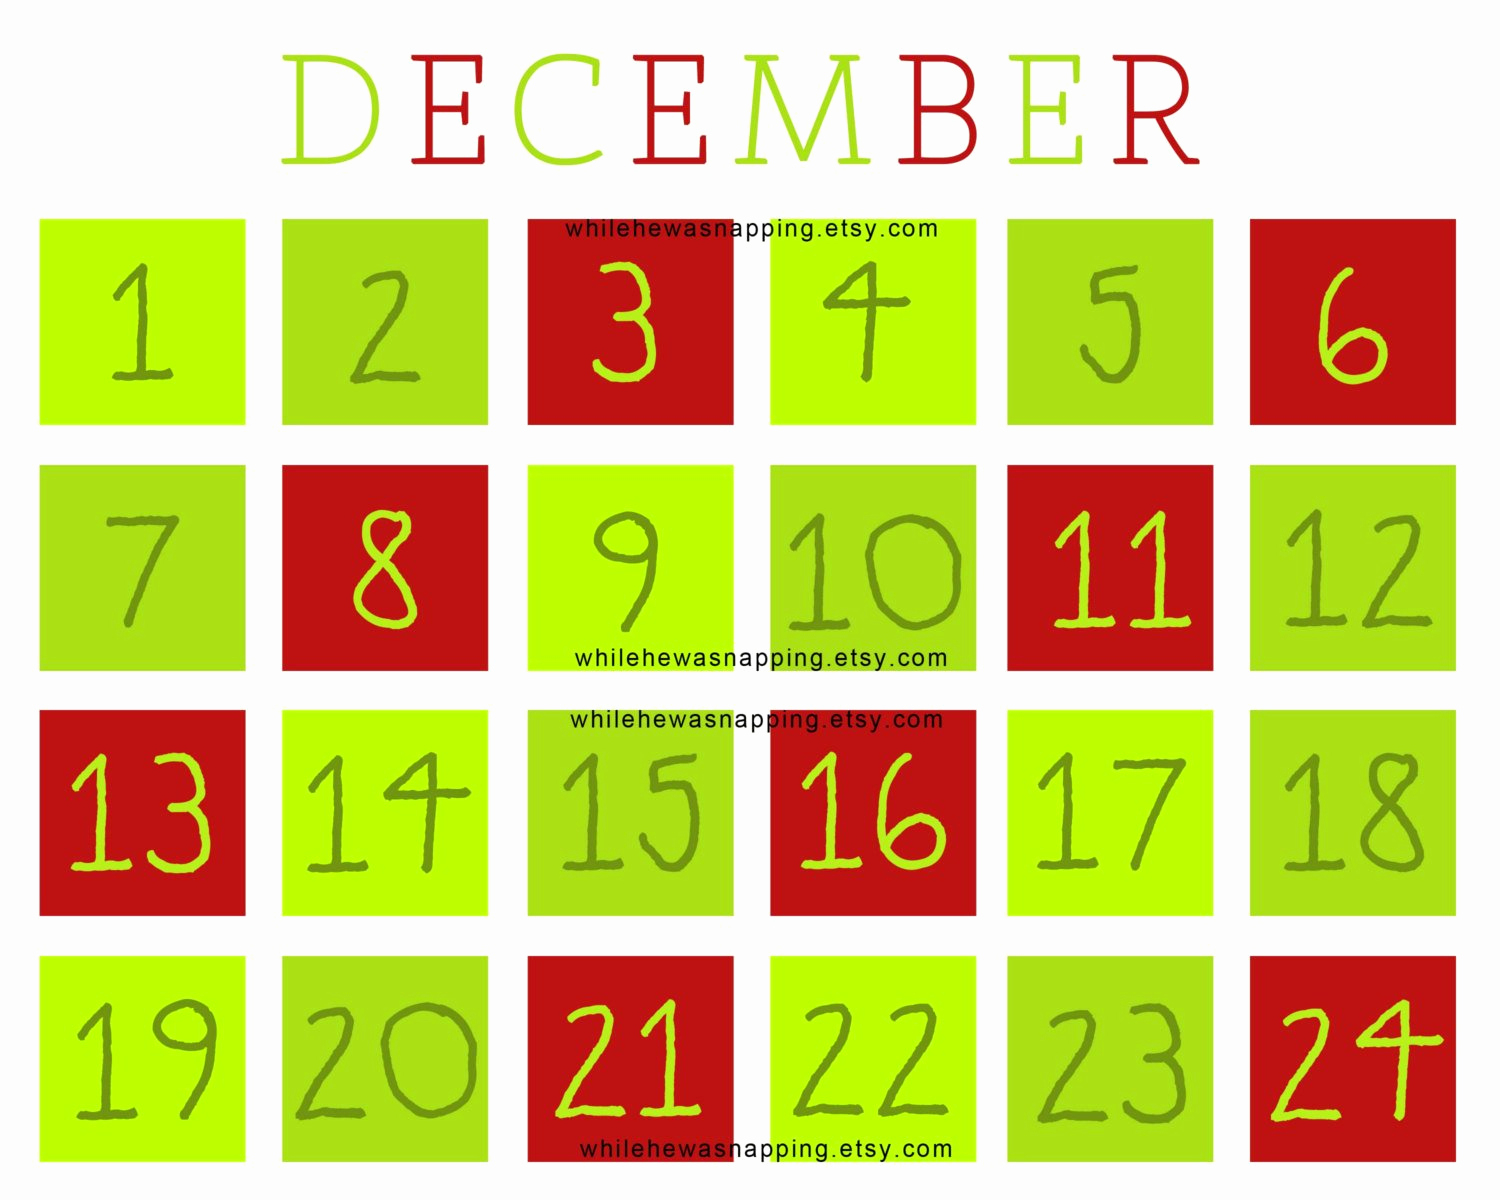 22 Awesome Christmas Countdown Calendars Kittybabylove 1